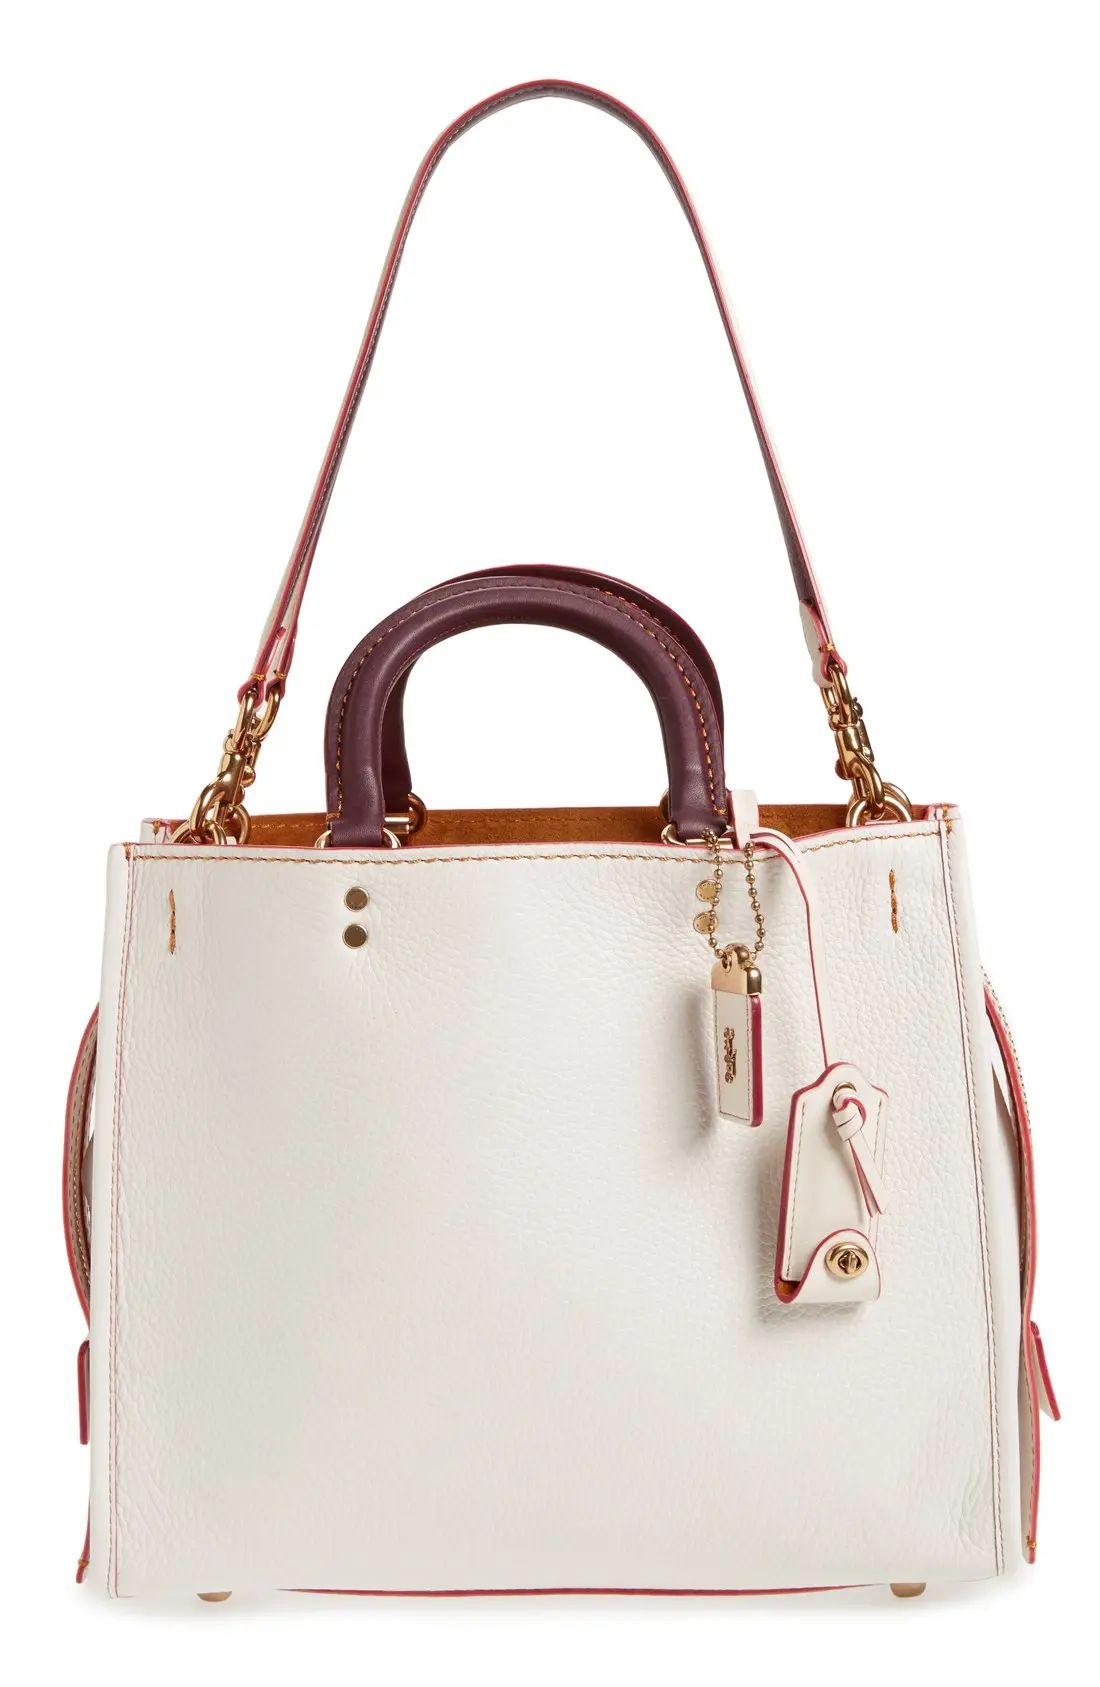 'Rogue' Leather Satchel | Nordstrom